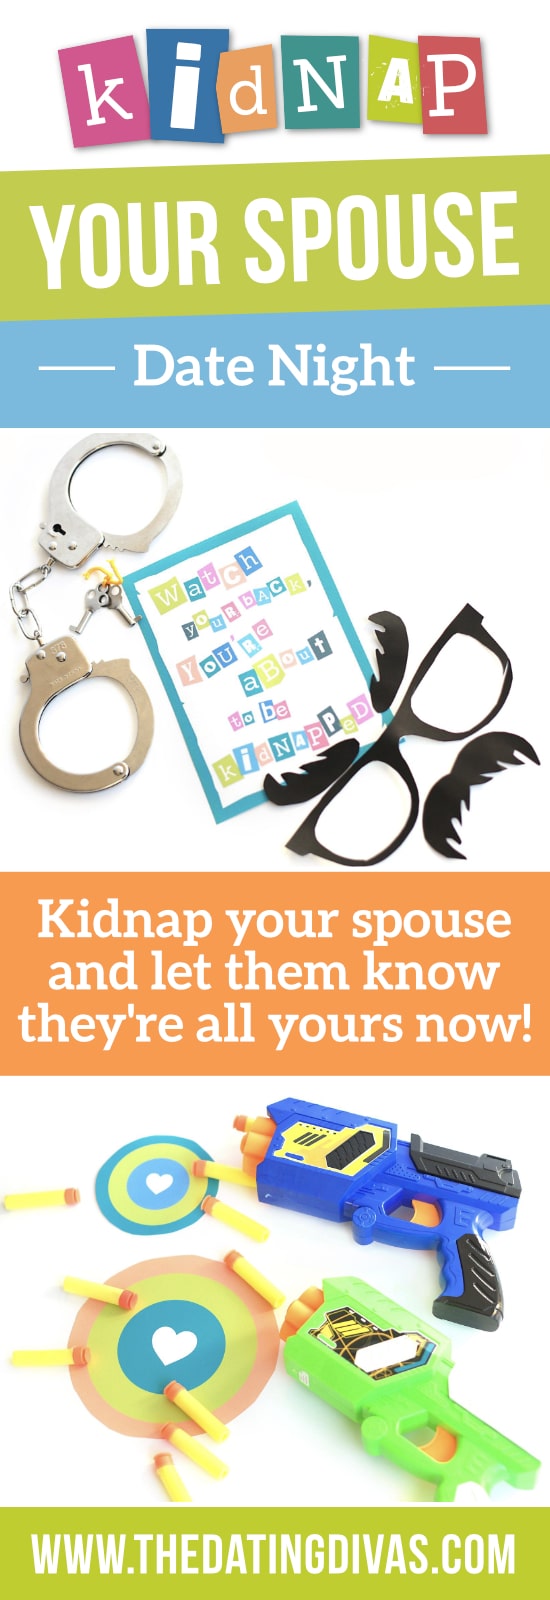 Kidnap Your Spouse Date Night